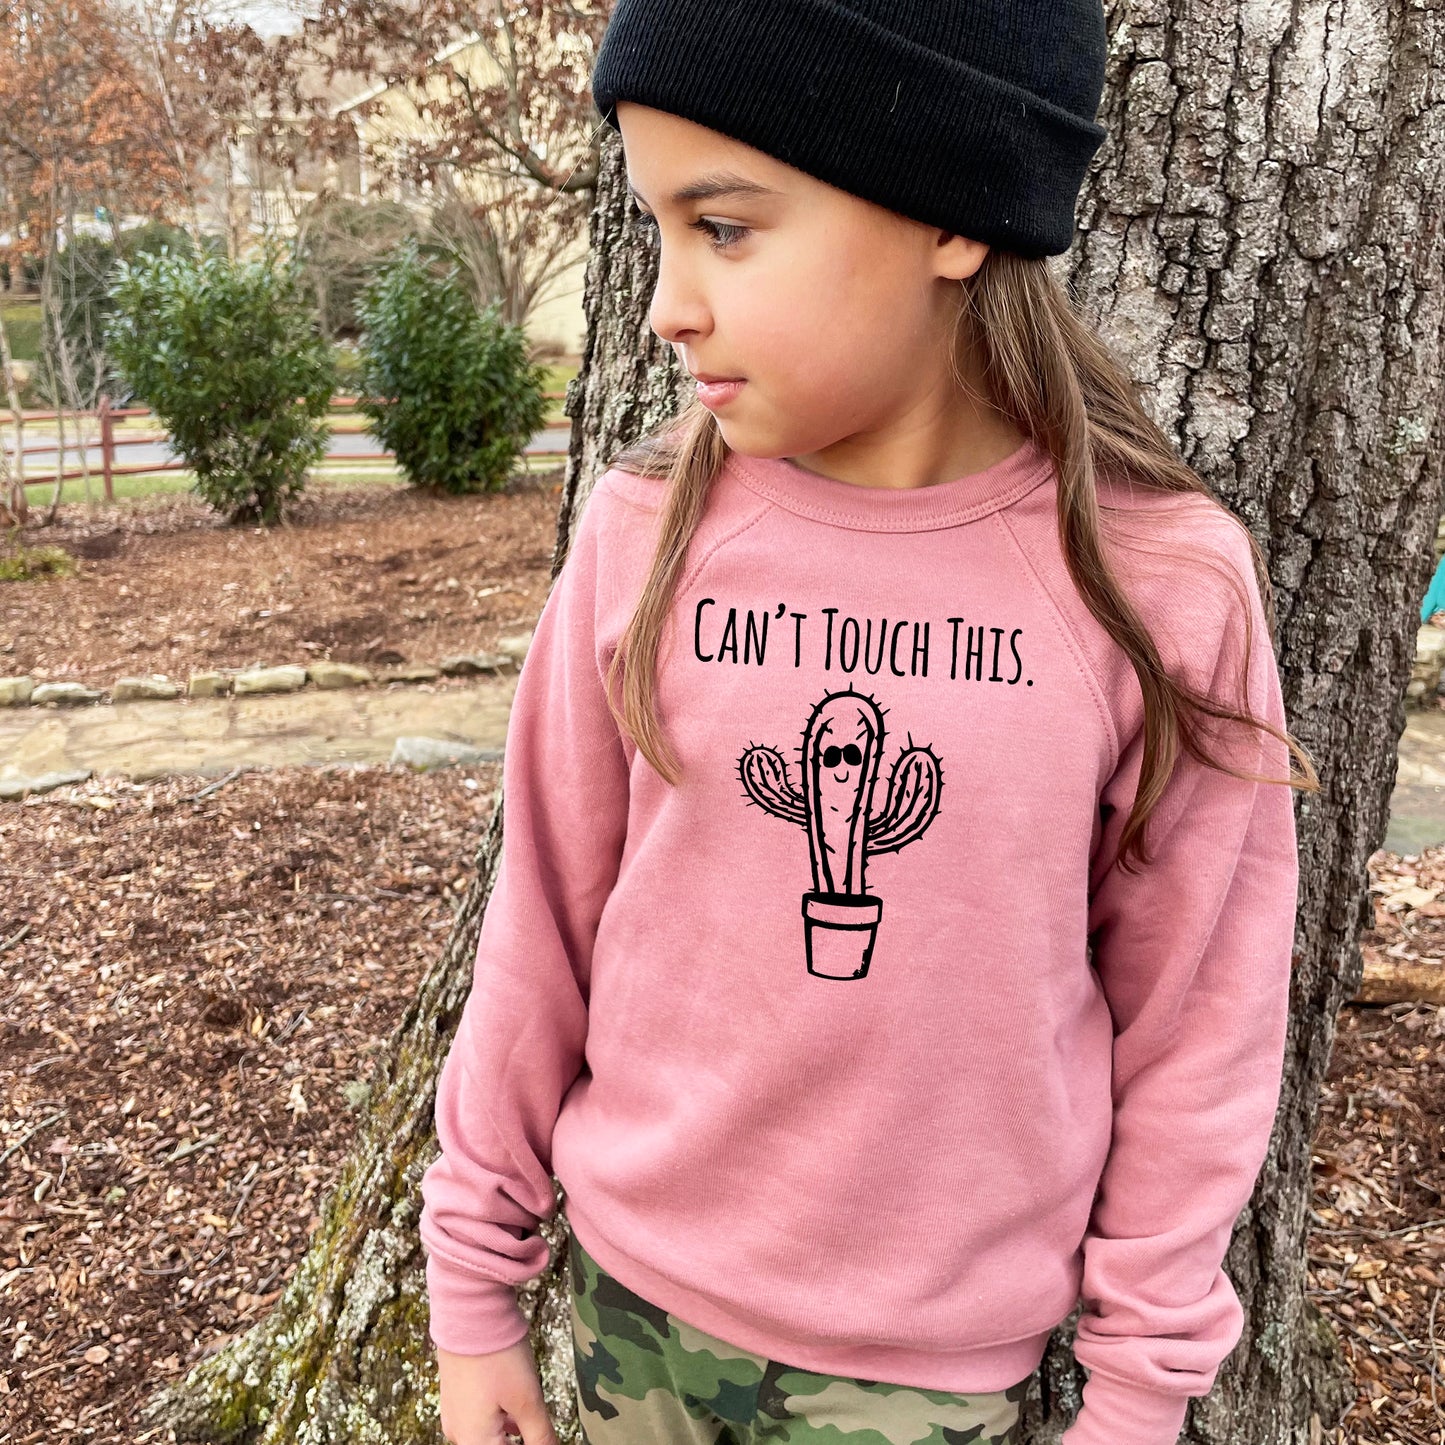 Can't Touch This (Cactus) - Kid's Sweatshirt - Heather Gray or Mauve